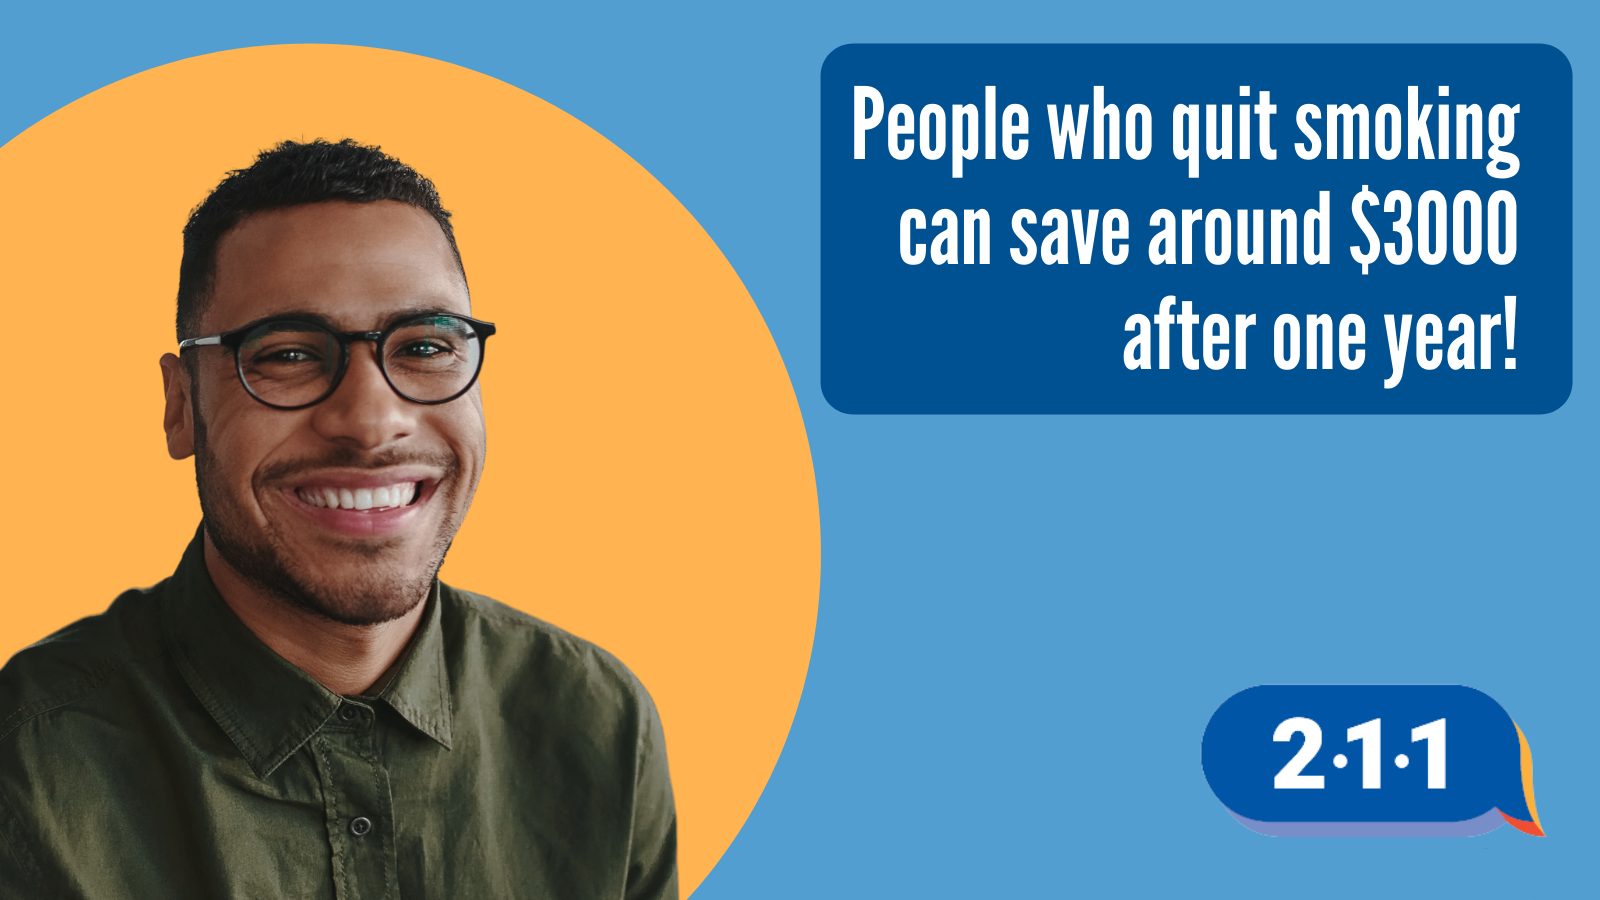 Smiling person and text: People who quit smoking can save around $3000 after one year! 2-1-1